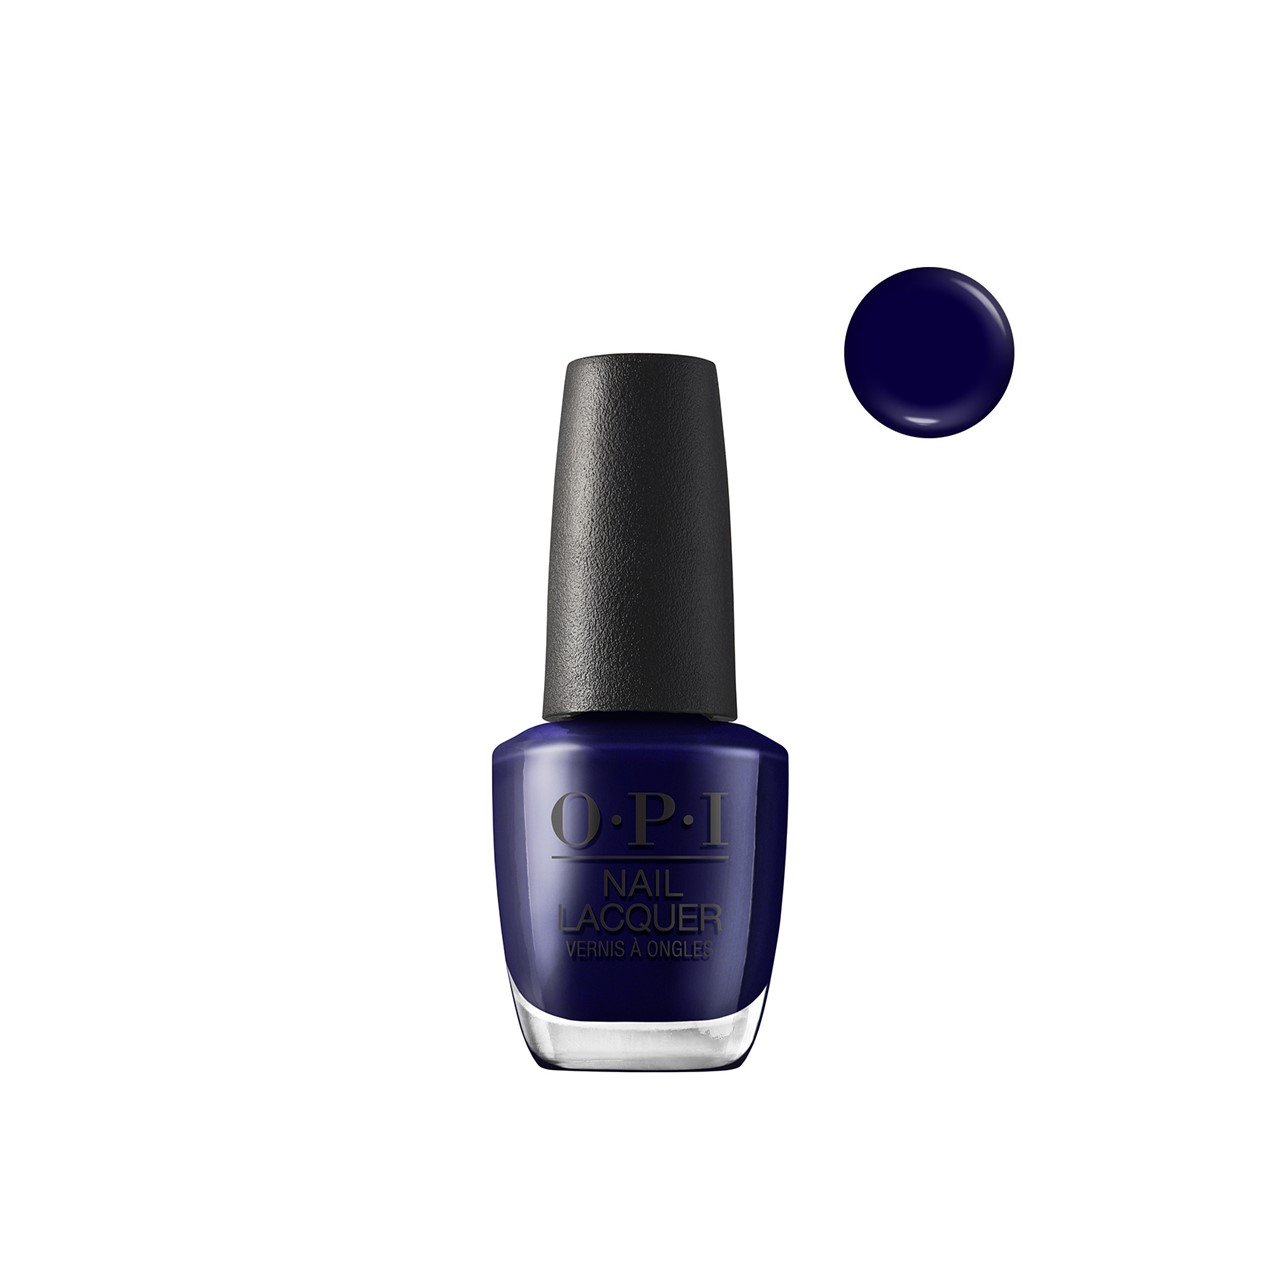 OPI Nail Lacquer Award for Best Nails Goes To… 15ml (0.51fl oz)